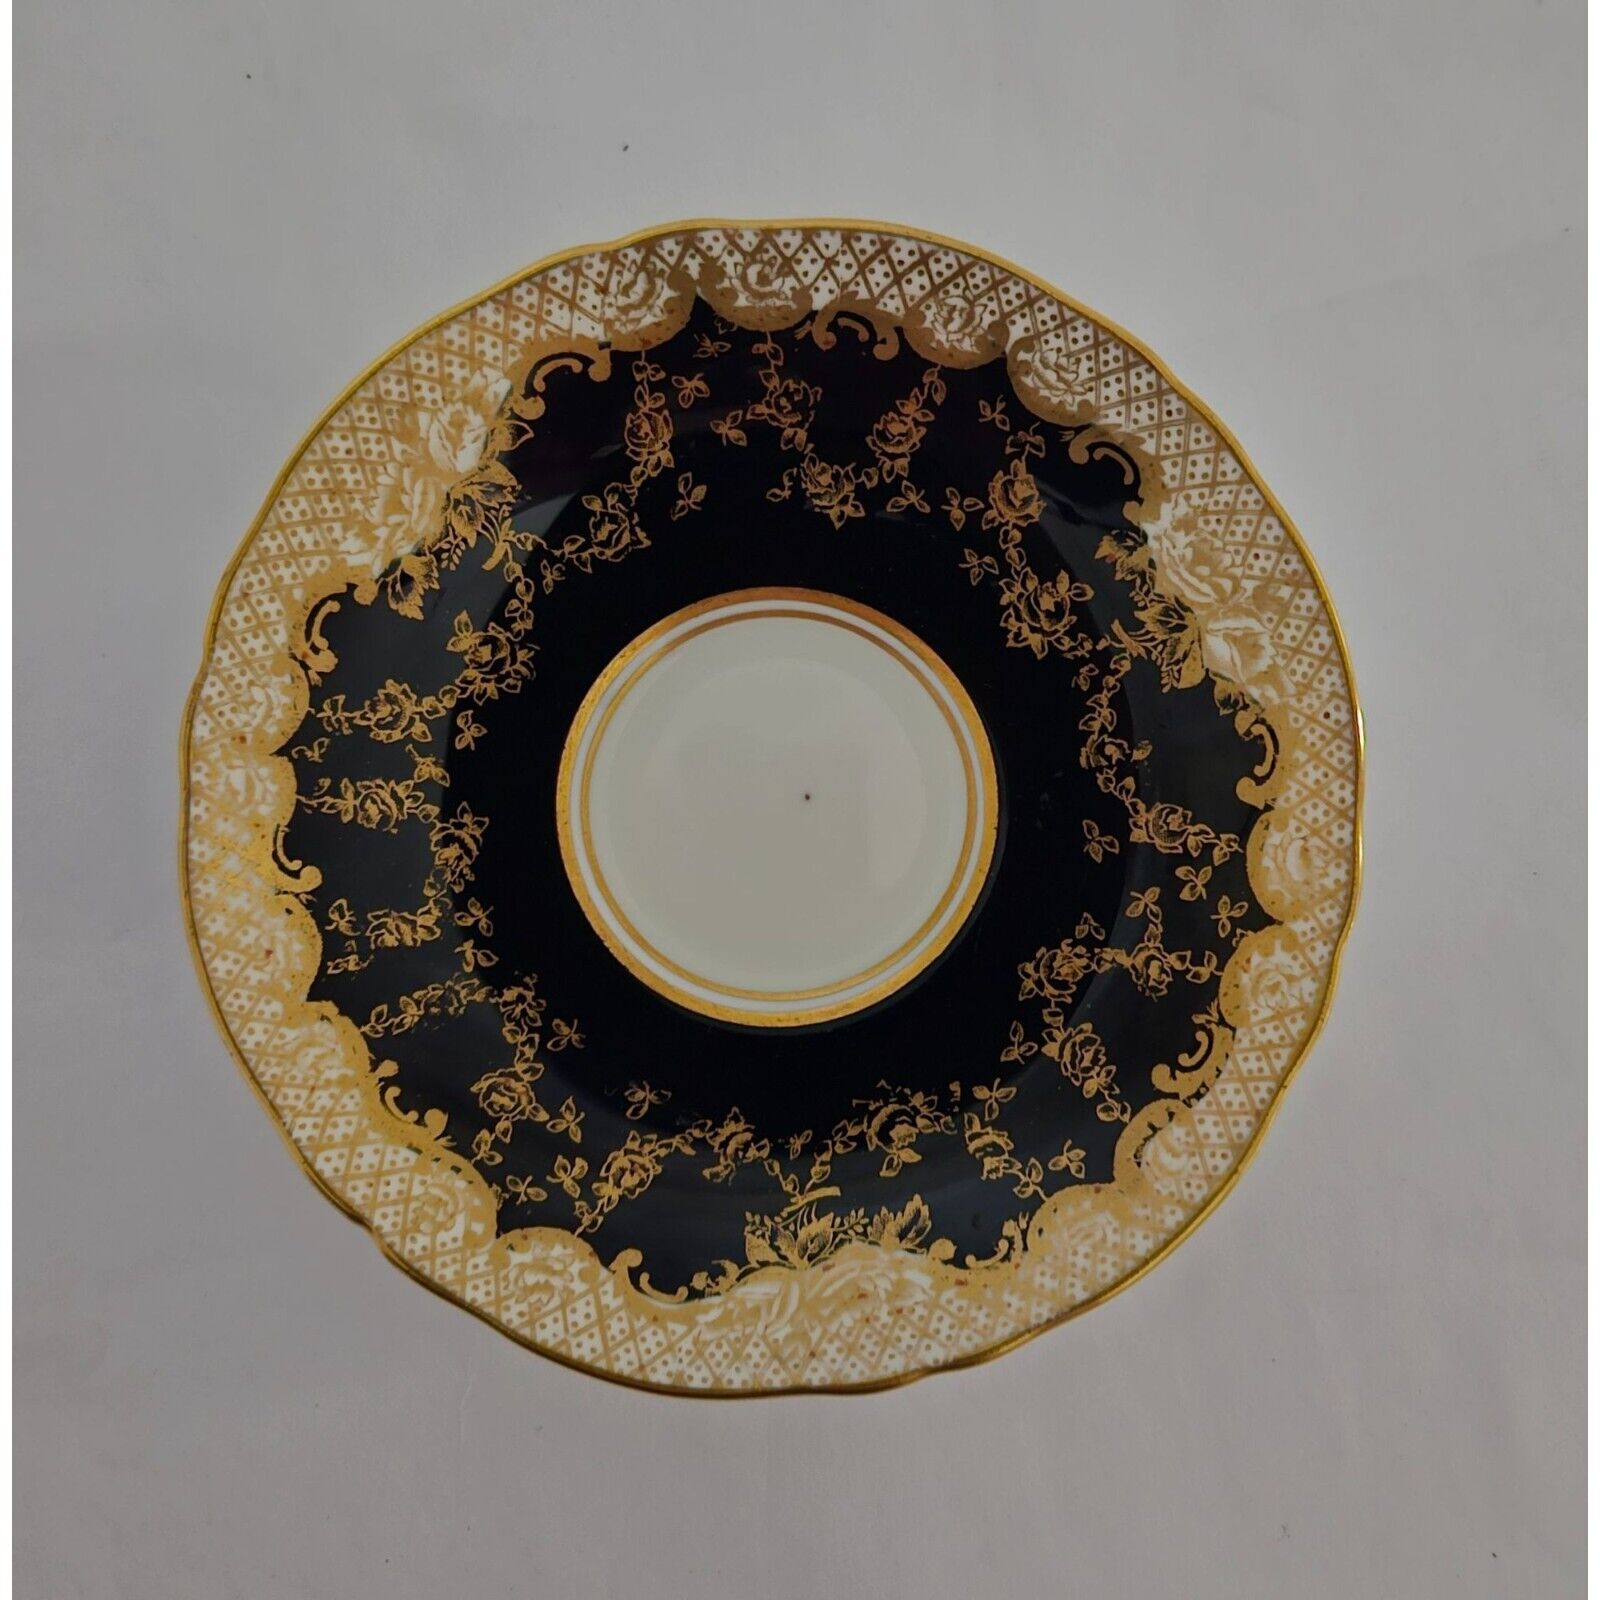 1930 Crown Staffordshire Fine Bone China Saucer Black And Gold A15919